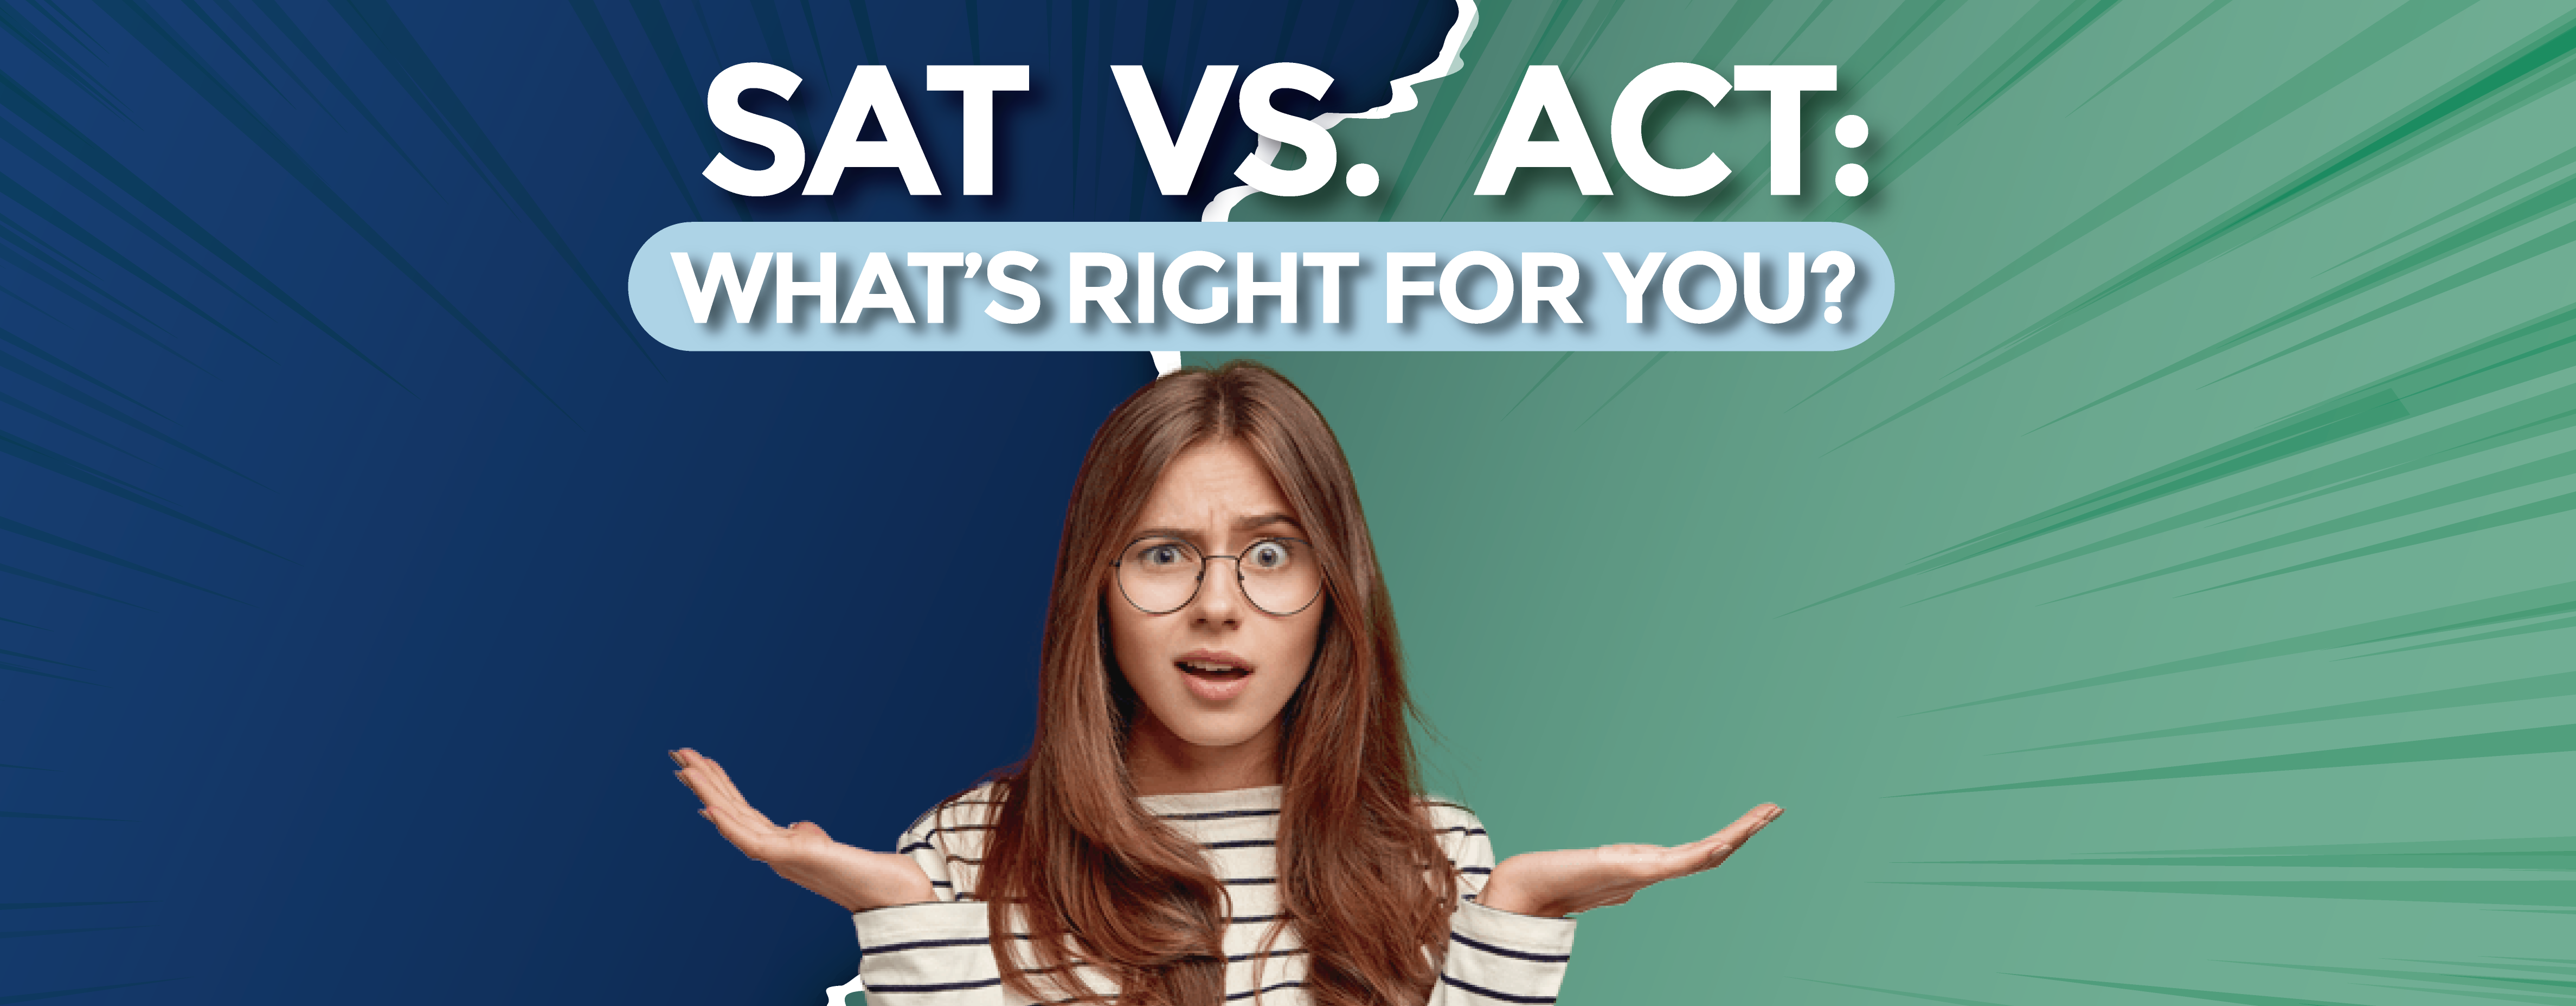 SAT vs. ACT: What’s Right for You?